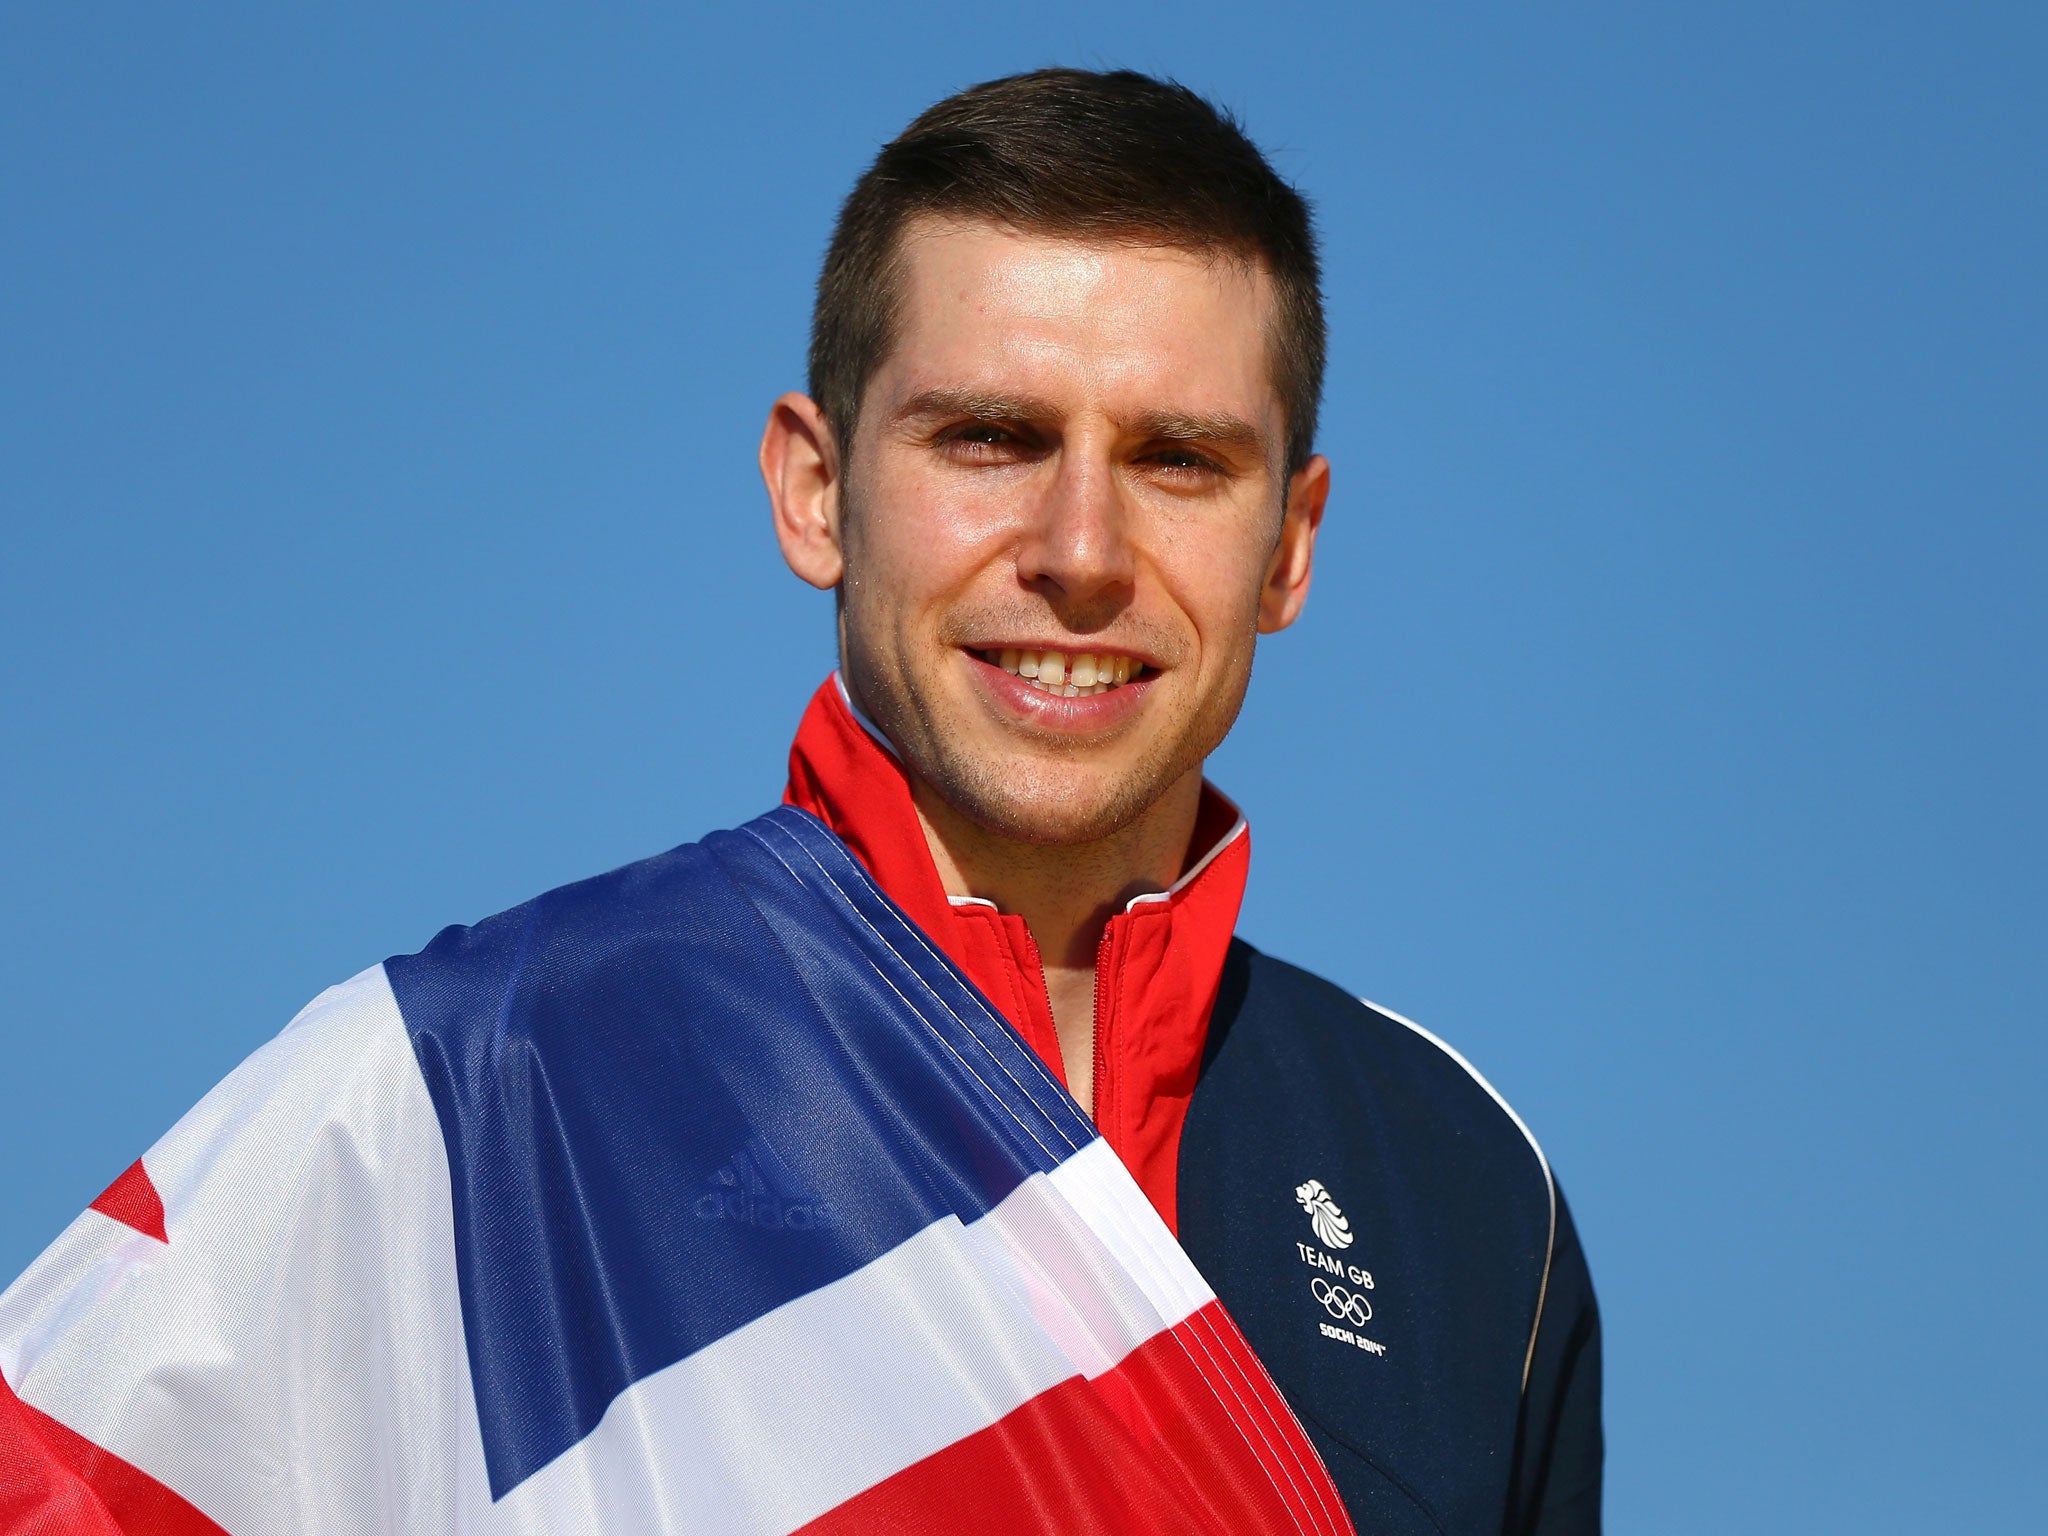 Jon Eley, a speed skater at his third Games, will lead out the British team at today’s opening ceremony